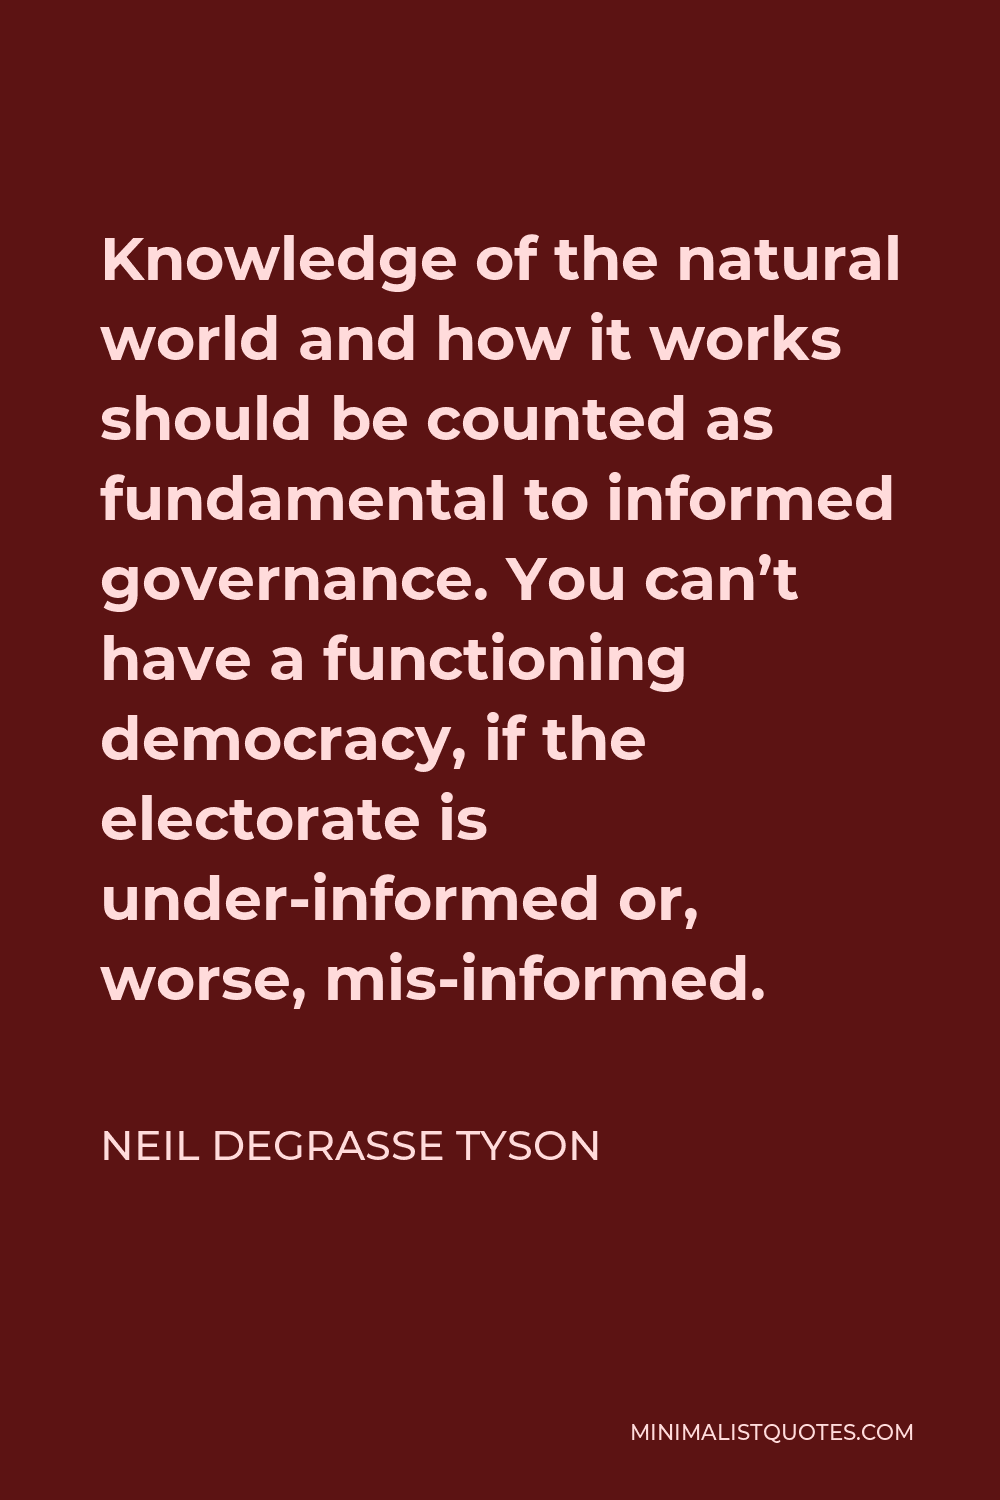 Neil deGrasse Tyson Quote - Knowledge of the natural world and how it works should be counted as fundamental to informed governance. You can’t have a functioning democracy, if the electorate is under-informed or, worse, mis-informed.